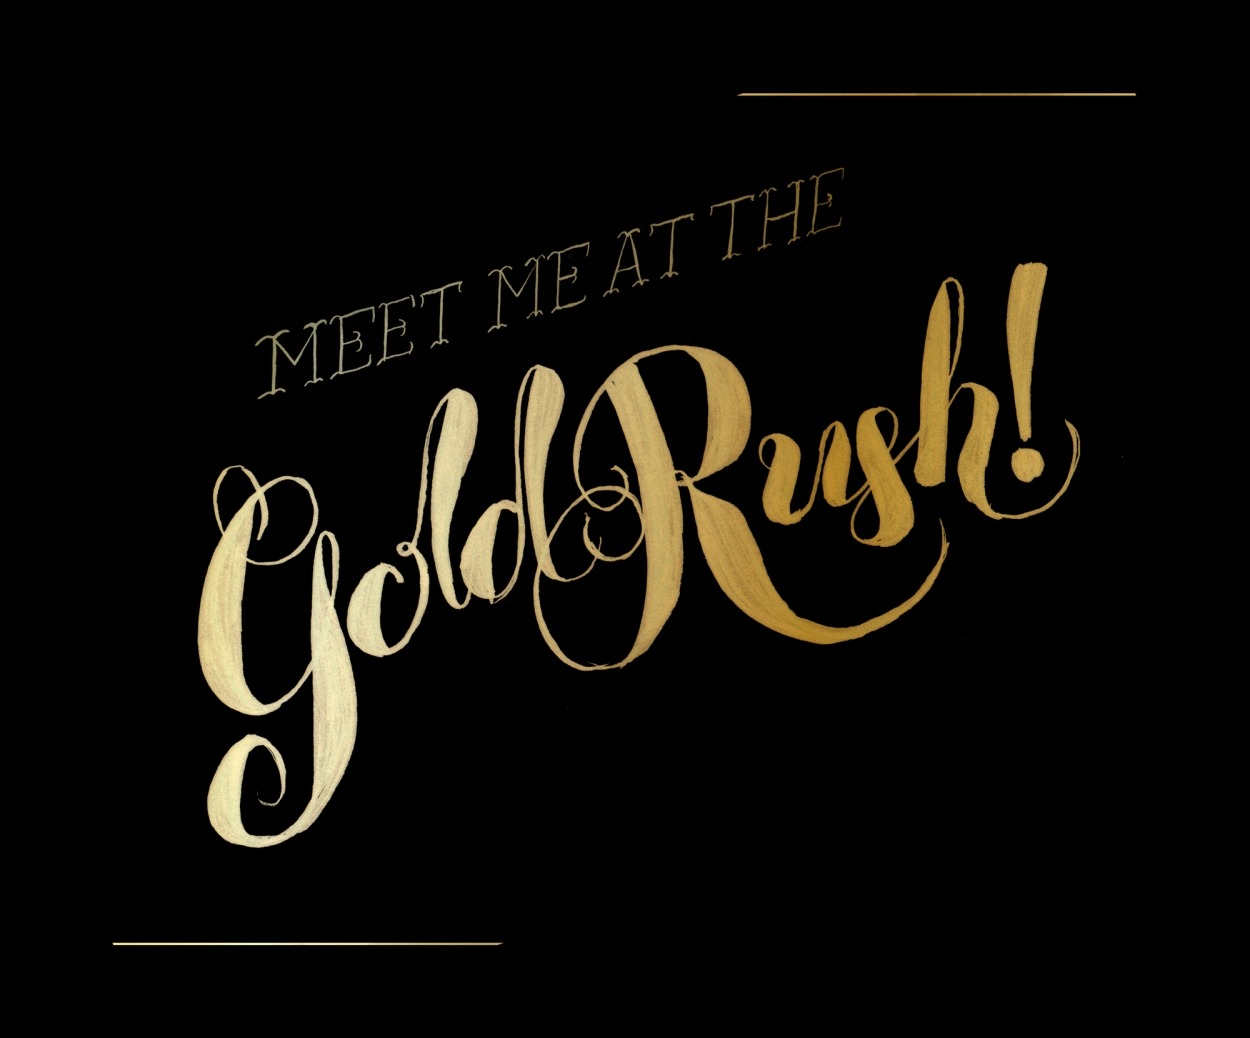 The Gold Rush HD Wallpaper In Movies Imageci